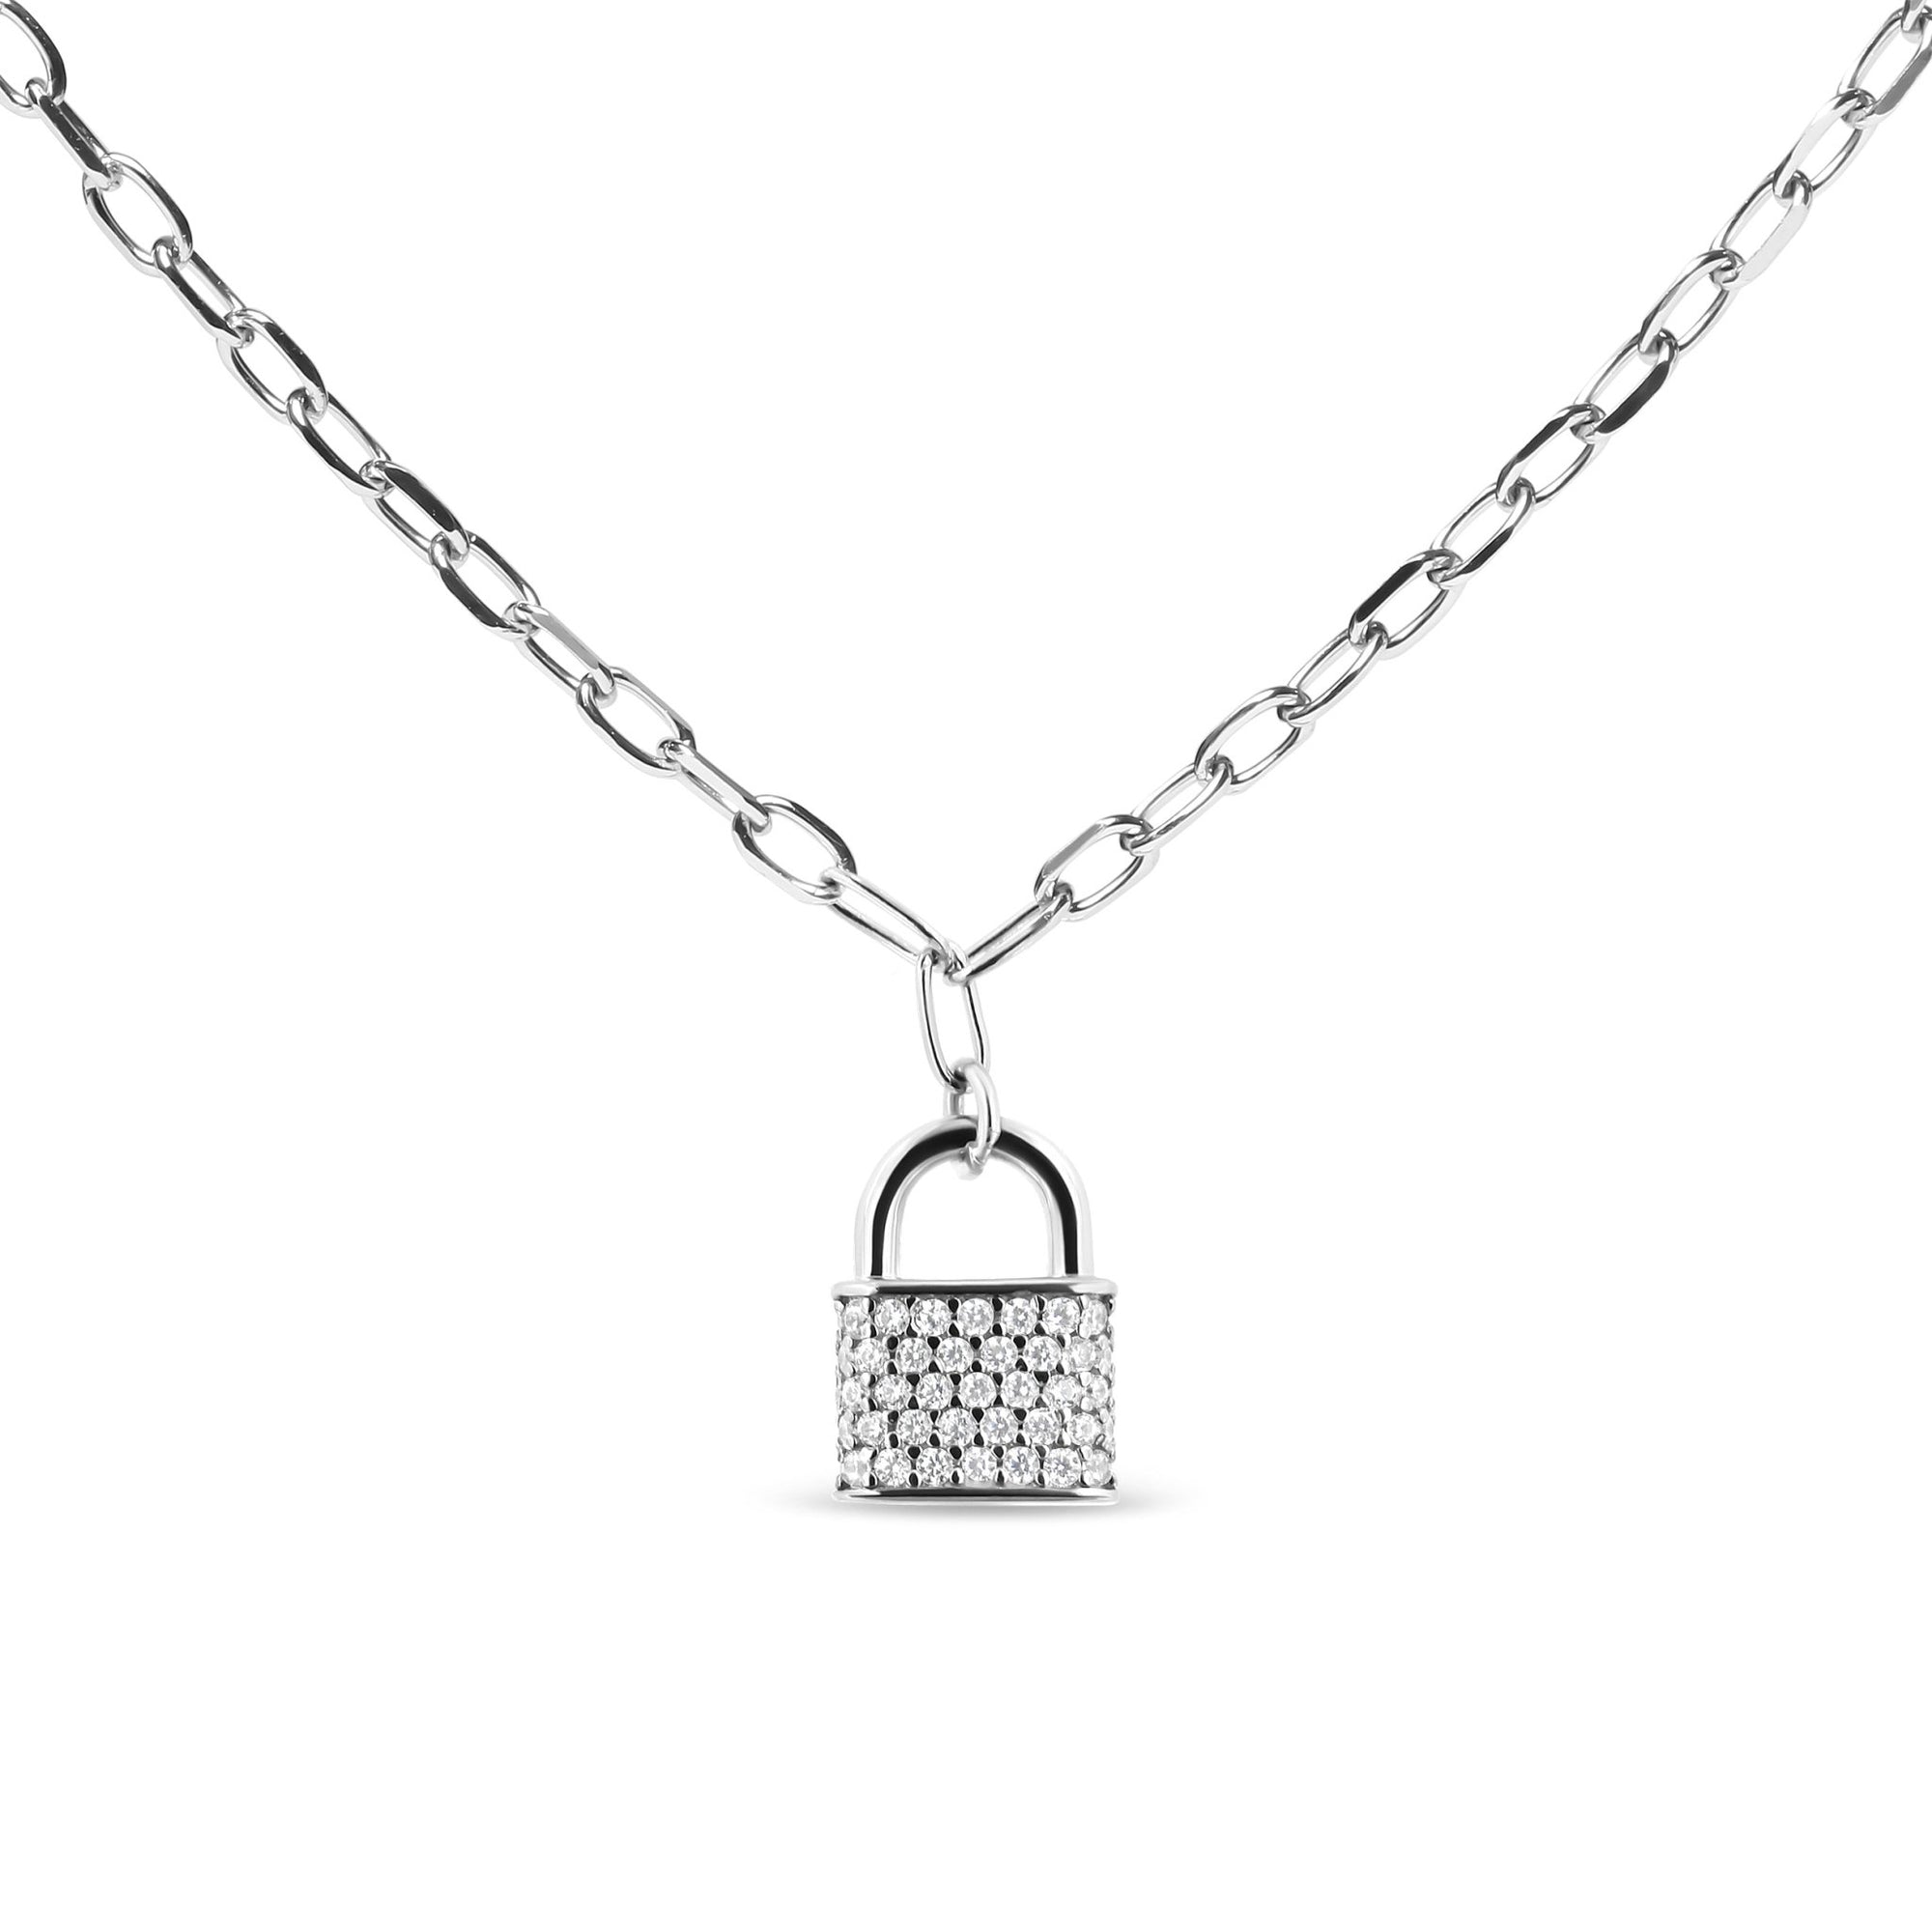 .925 Sterling Silver 1/4 Cttw Diamond Lock 18" Pendant Necklace with Paperclip Chain (H-I Color, SI2-I1 Clarity) - LinkagejewelrydesignLinkagejewelrydesign